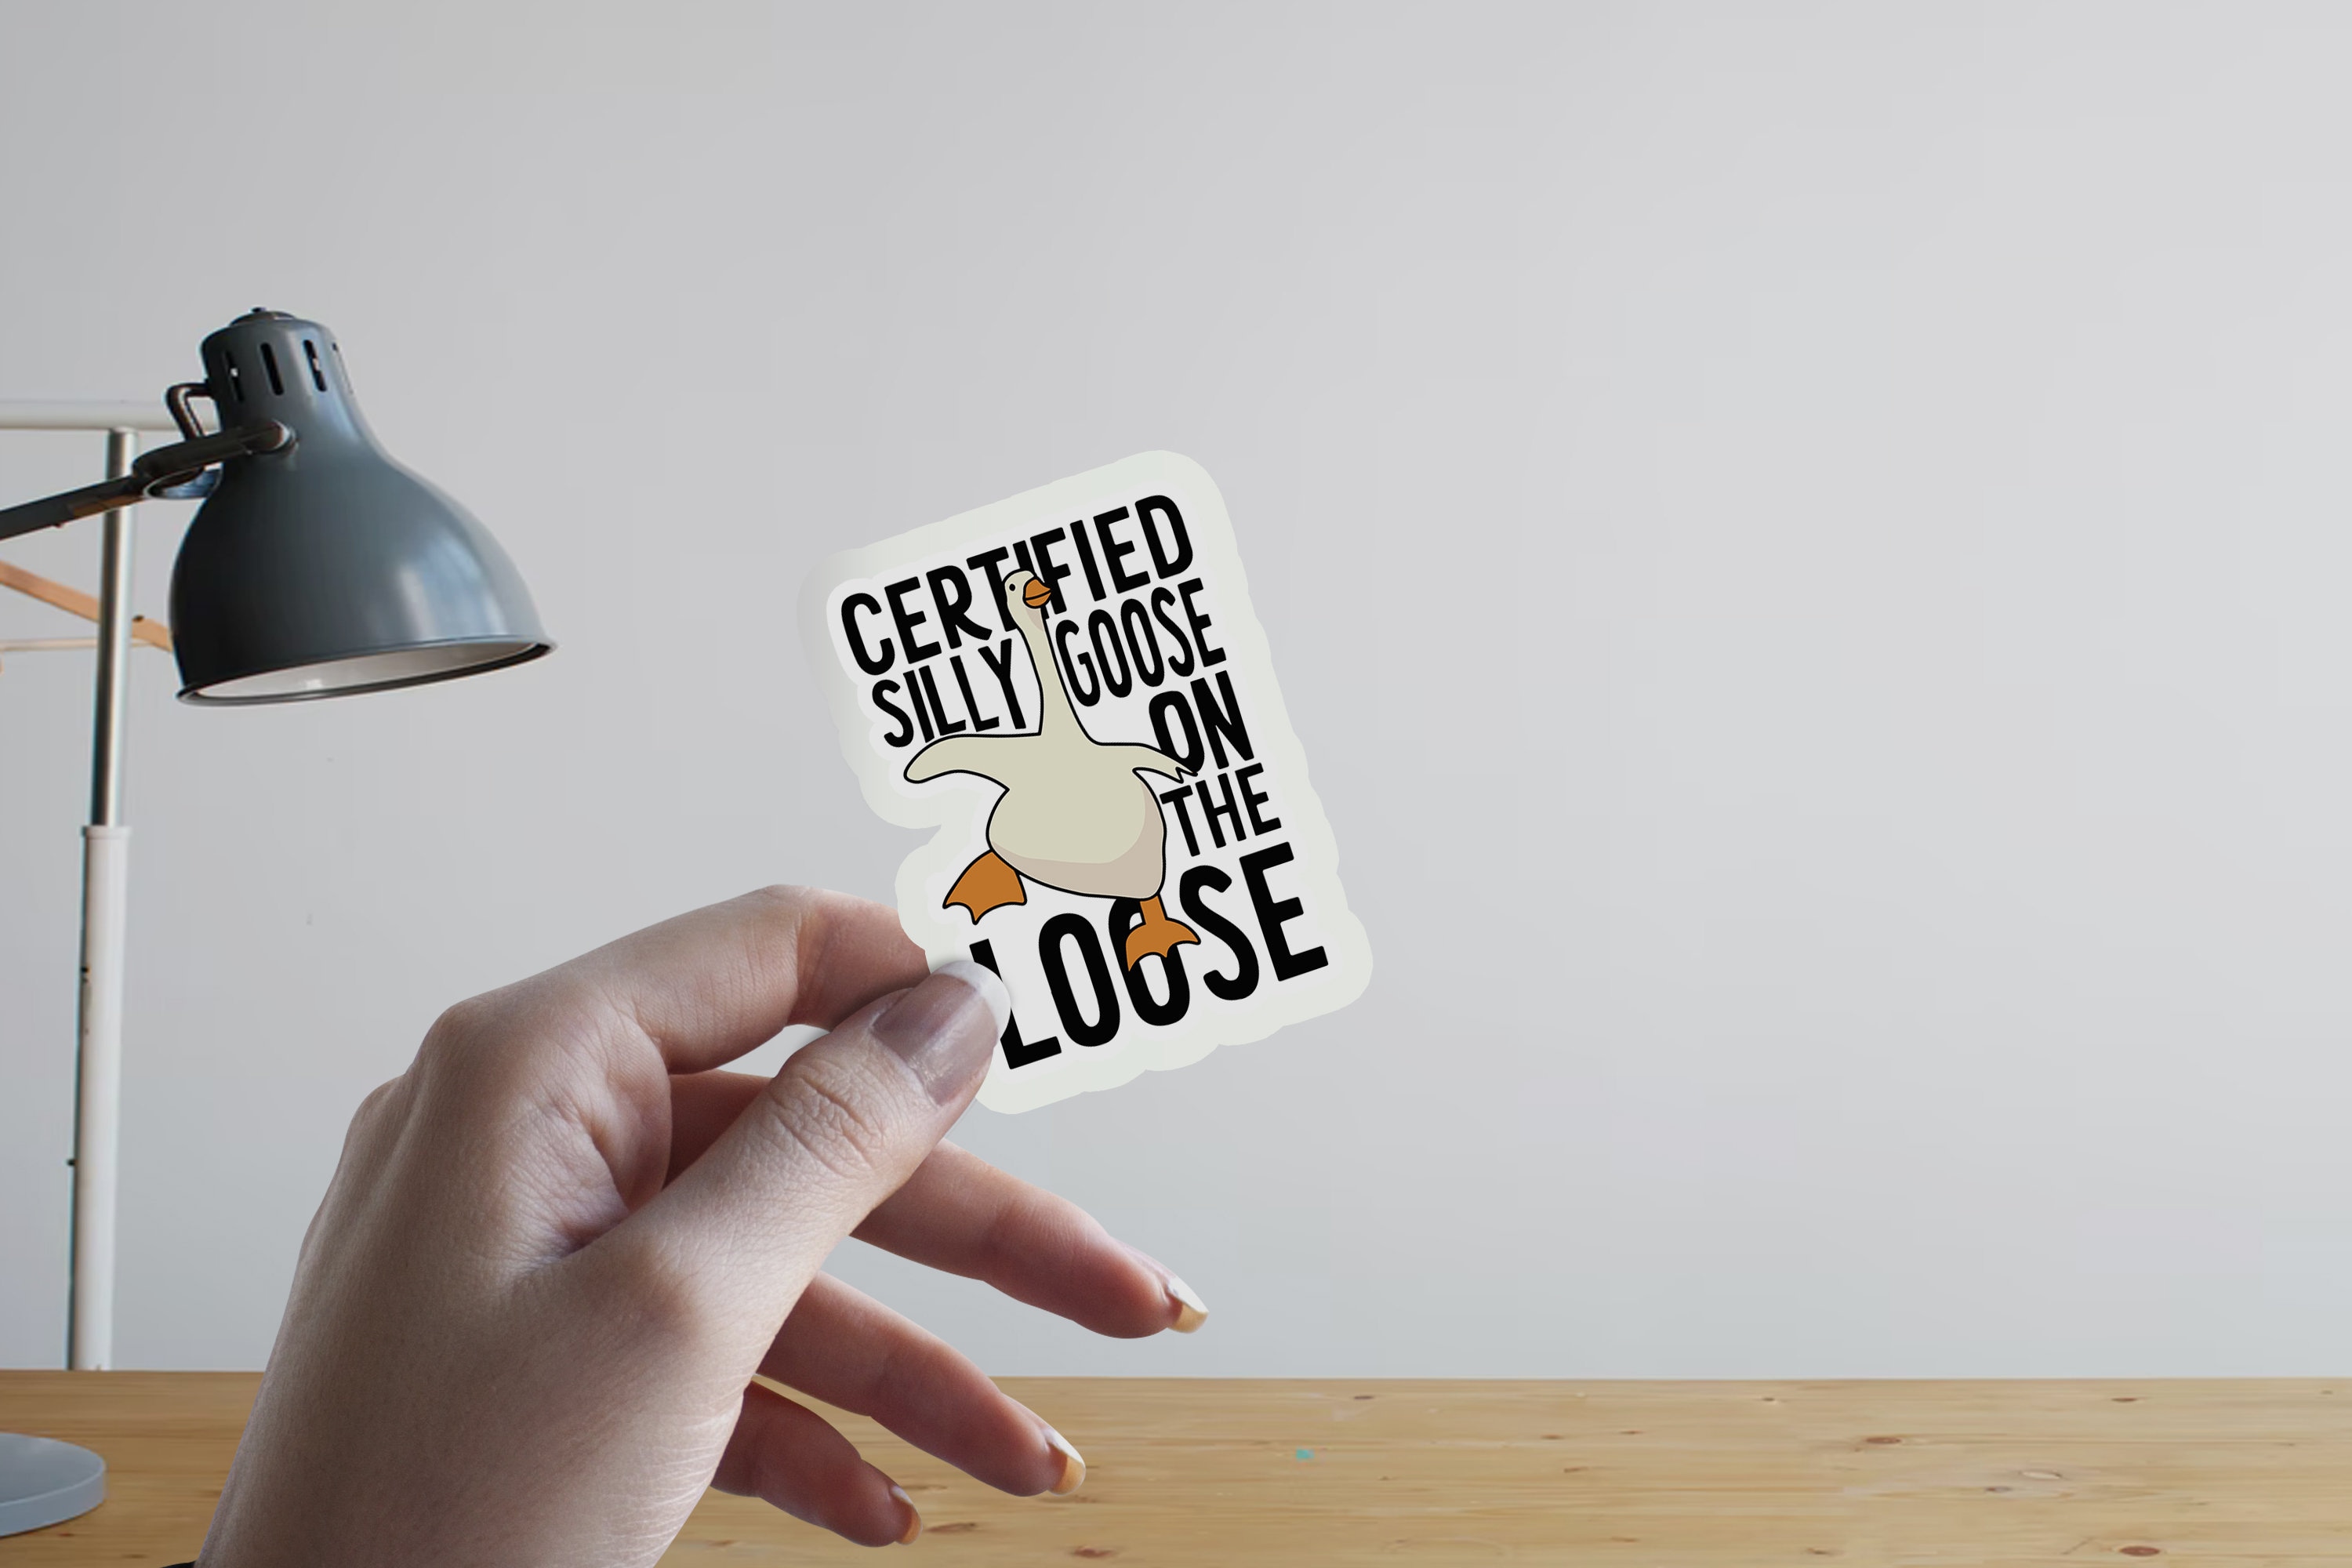 Certified Silly goose ID Sticker for Sale by MonicaEDesignz